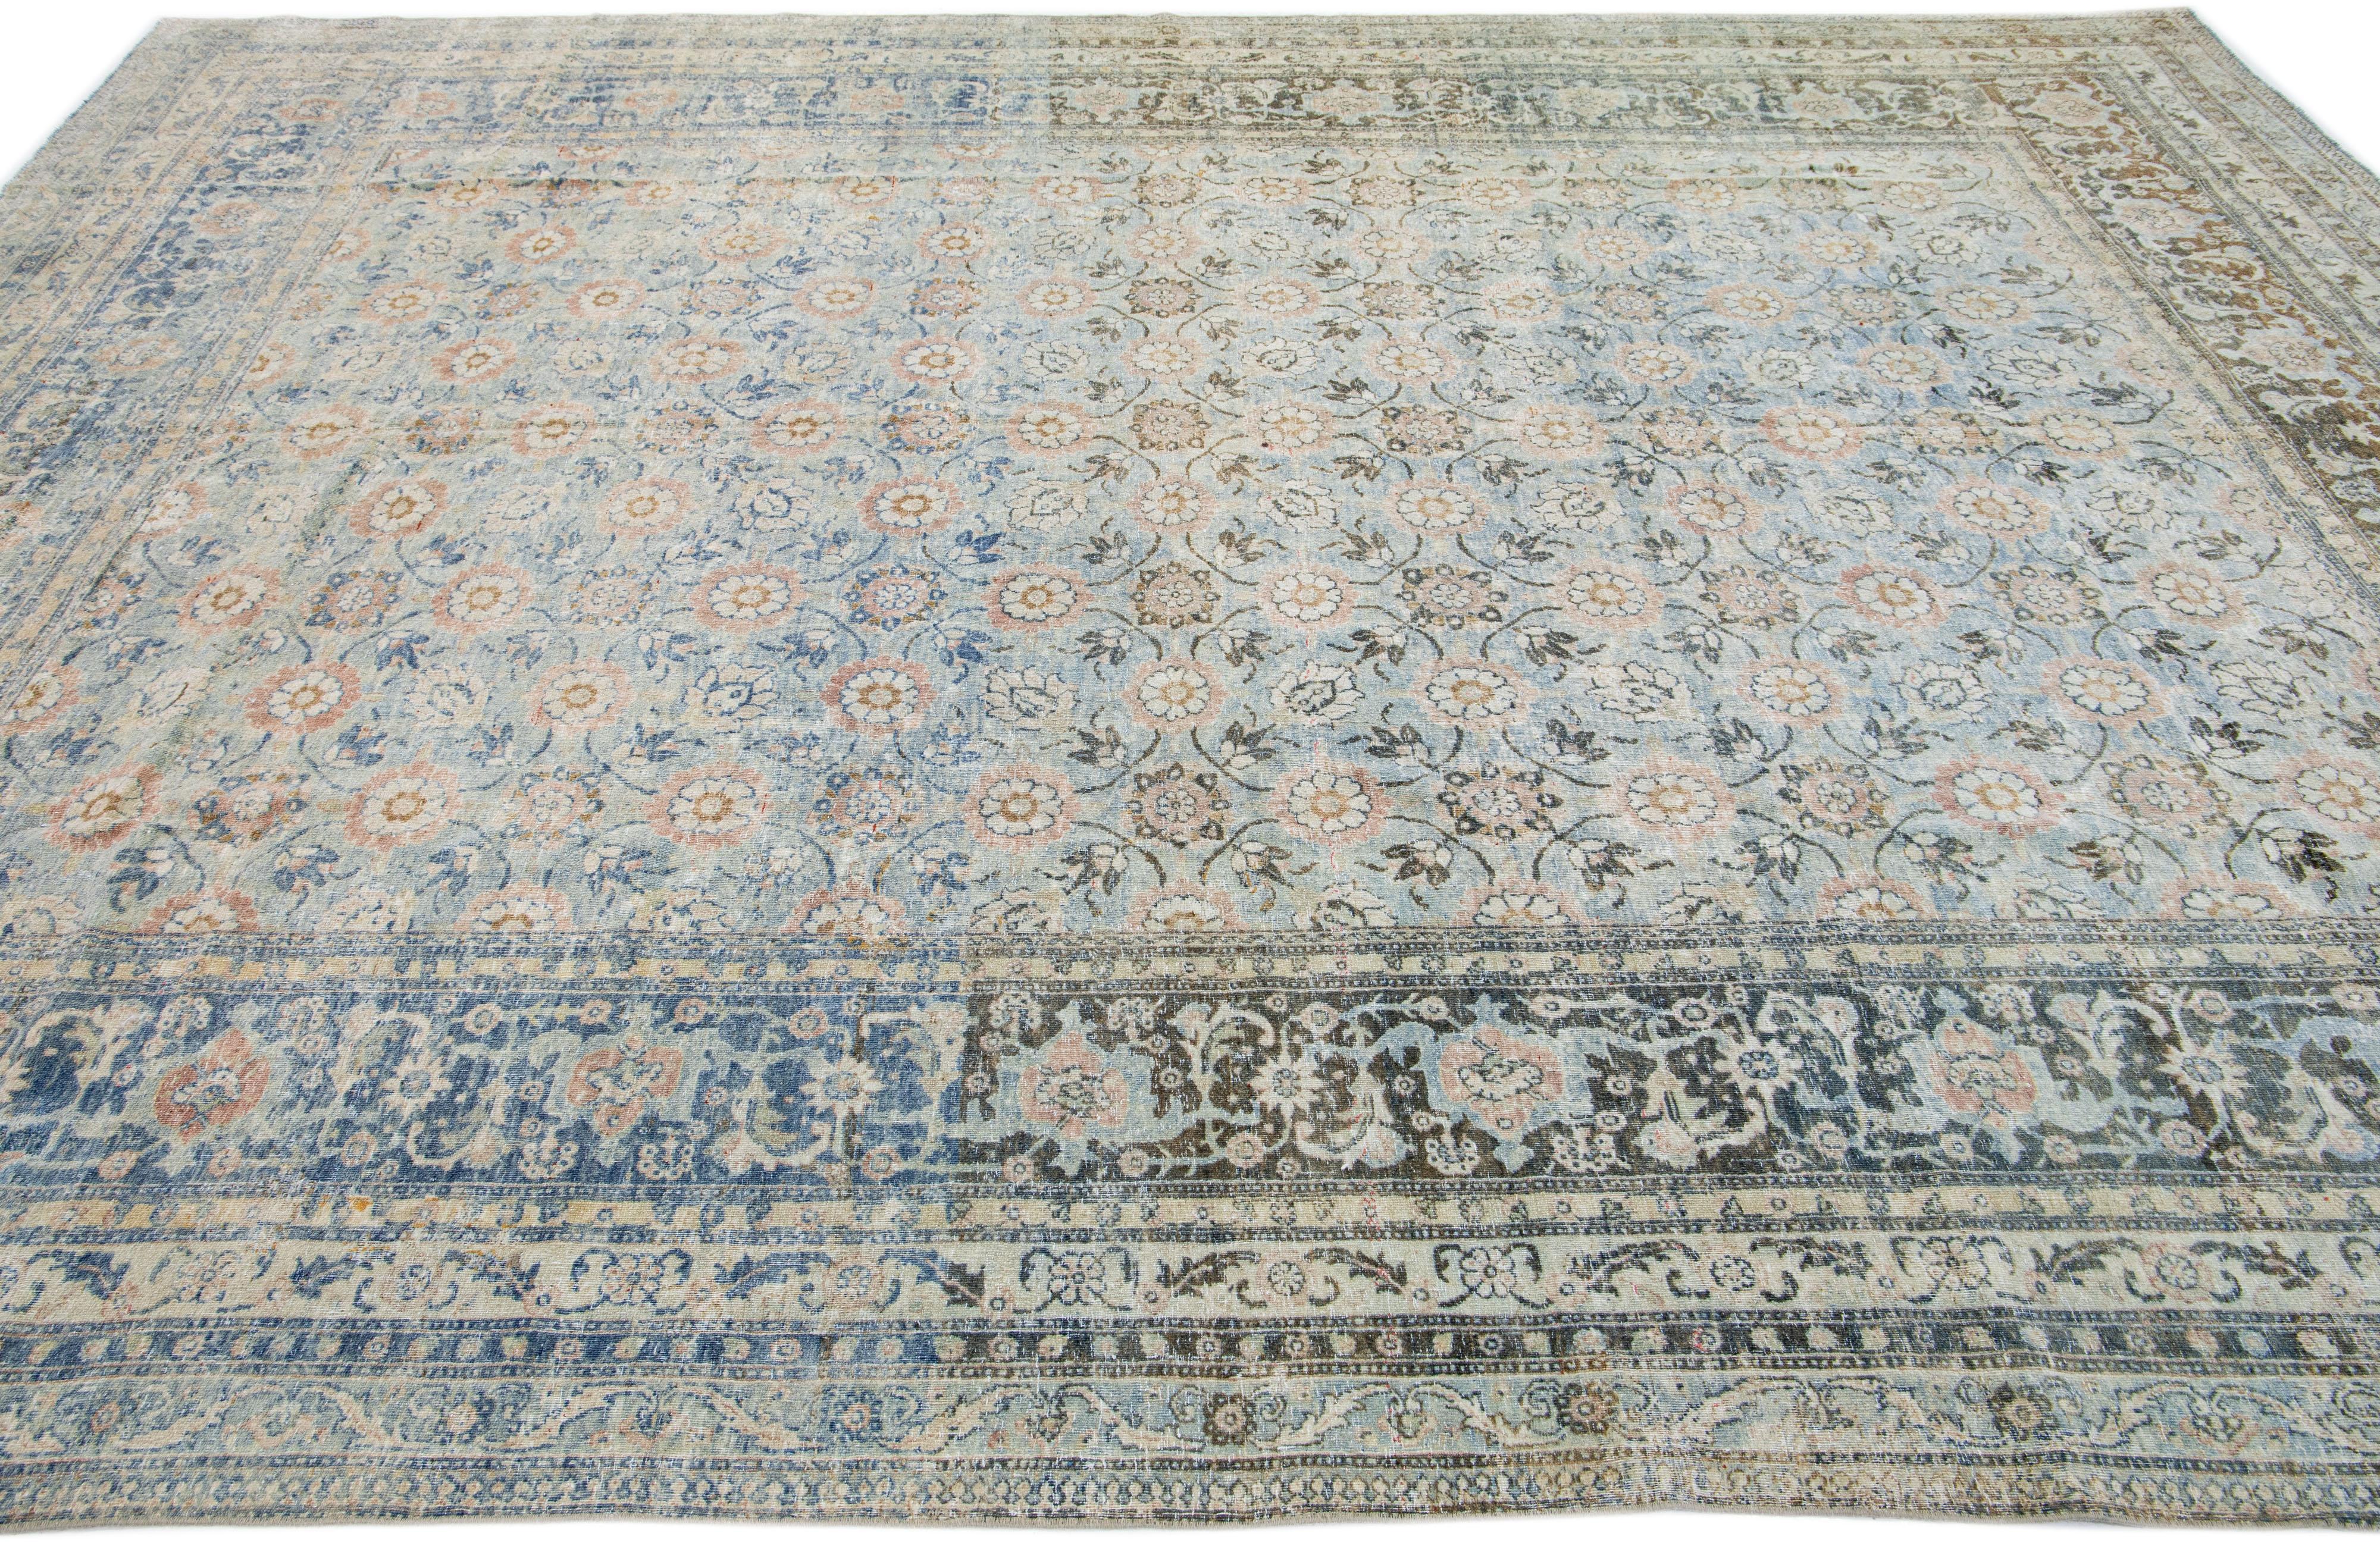 19th Century Antique Persian Tabriz Wool Rug Handmade Blue with Floral Motif For Sale 1